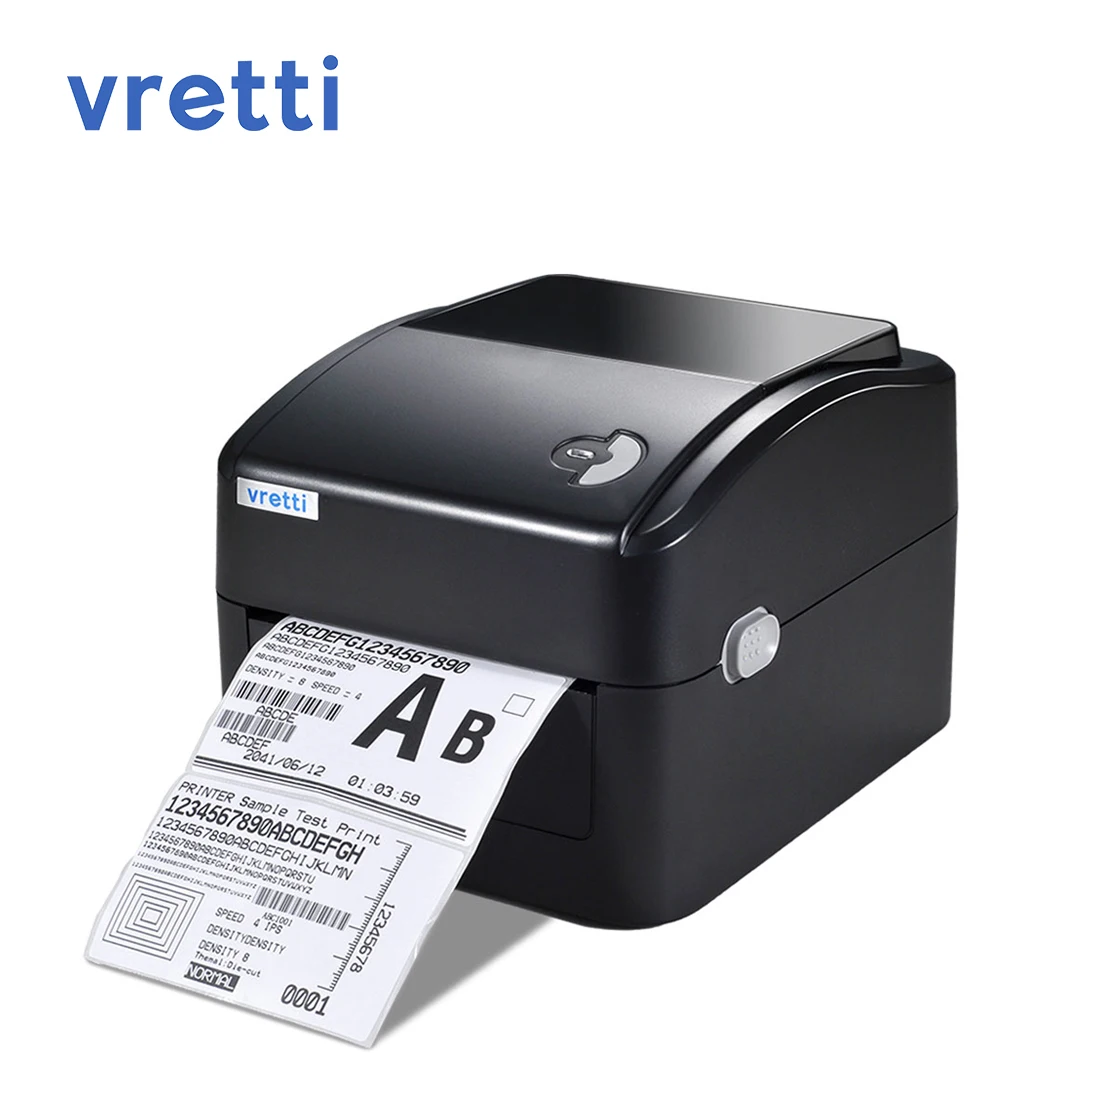 

hot sale 4 inch thermal barcode label printer with usb interface Optional BT/Wifi connect